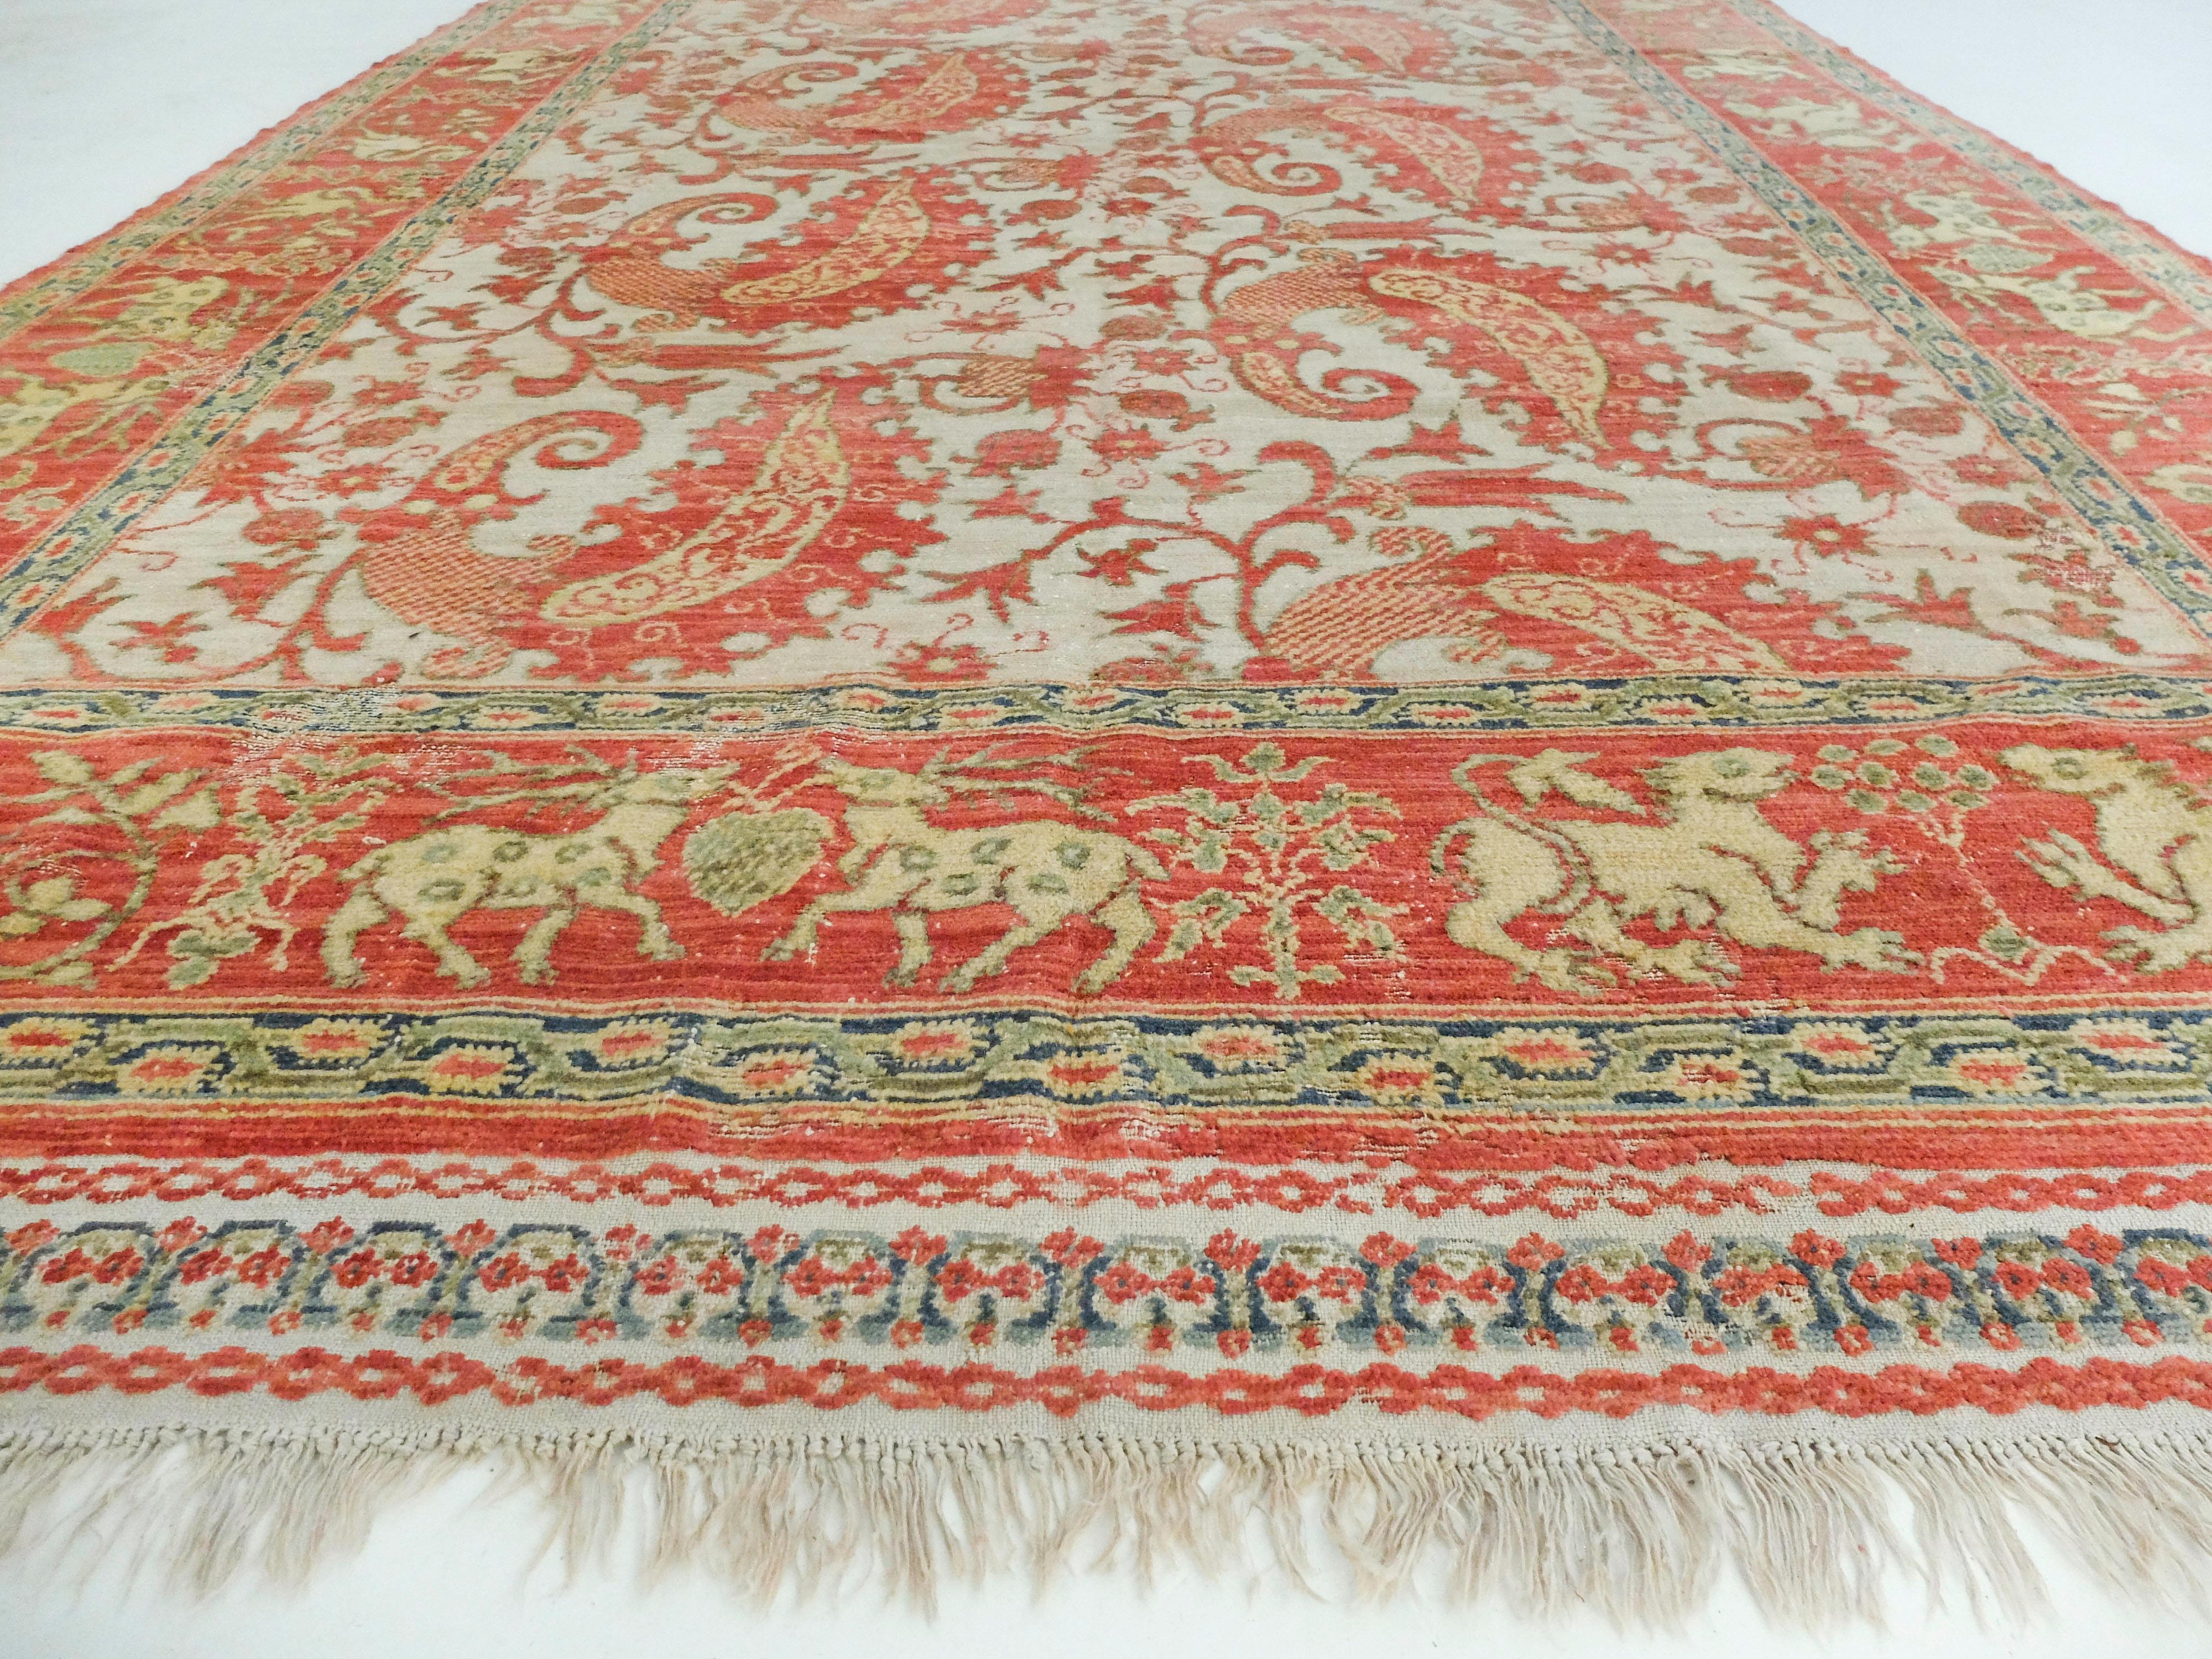 This stunning antique Portuguese runner displays the most exquisite of warm tones. It has soft red-orange colors intermixed with gold tones. The center is patterned with paisley-like shapes while the border is decorated with animals including deer